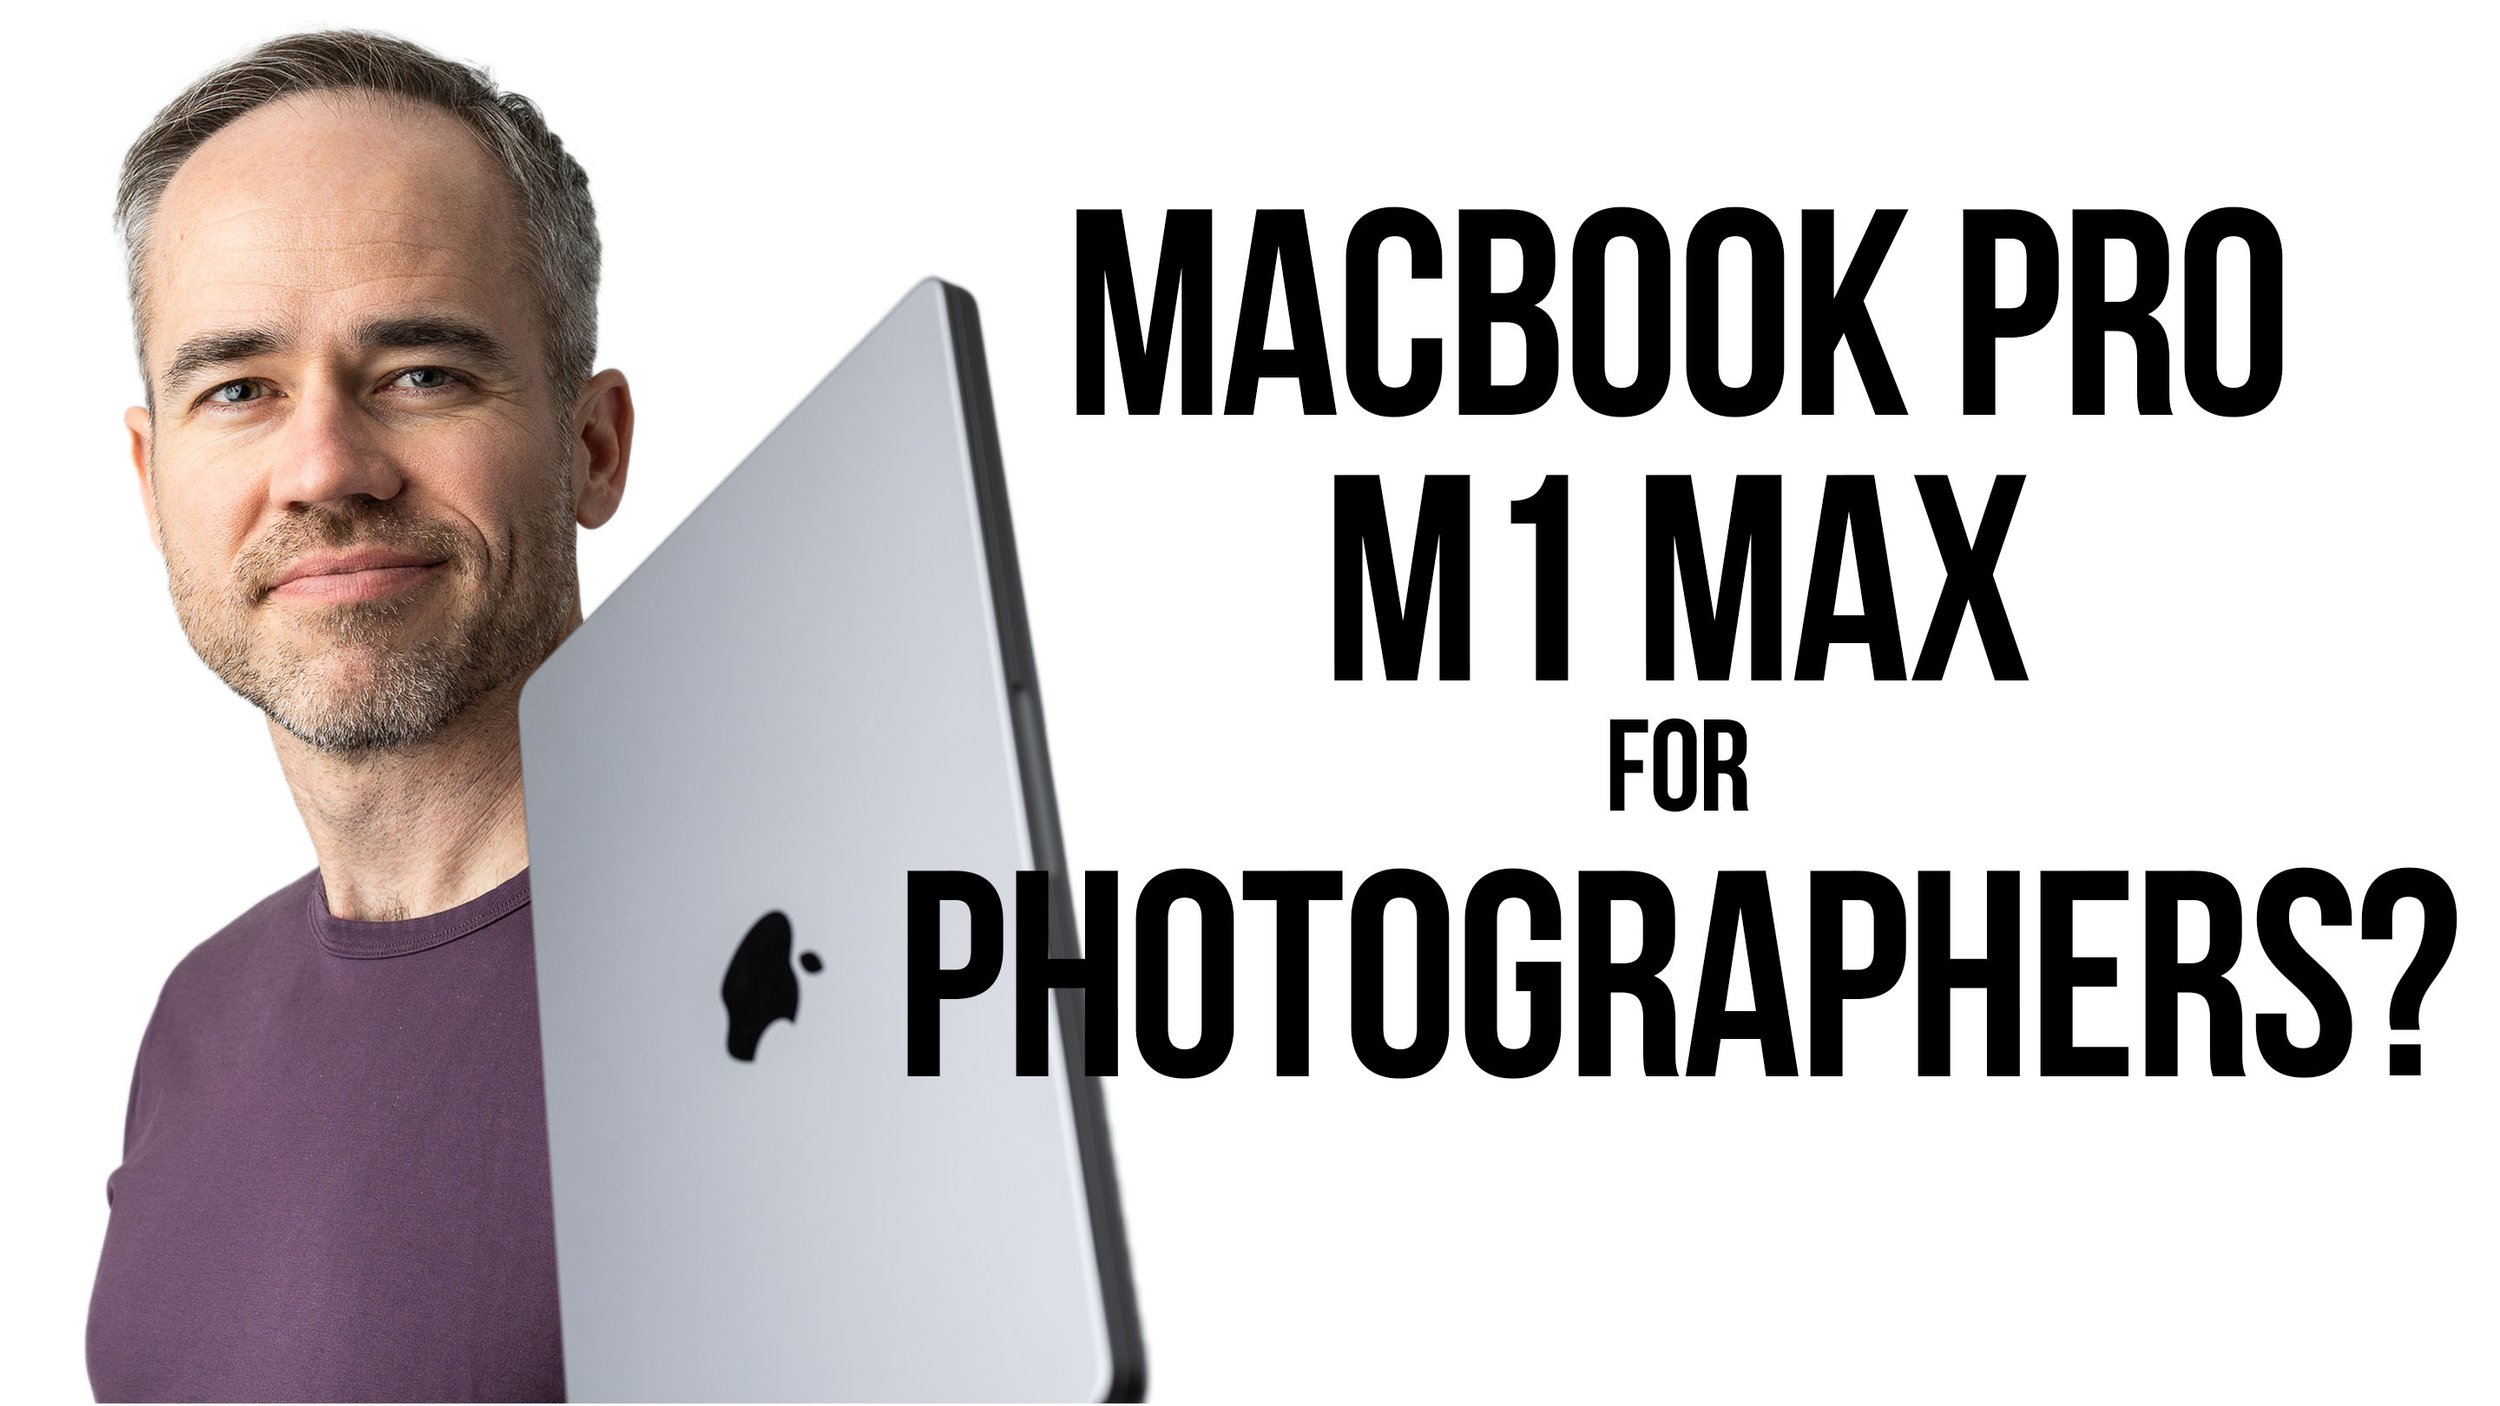 MacBook Pro M1 Max for Photographers — Headshots by Scott Lawrence